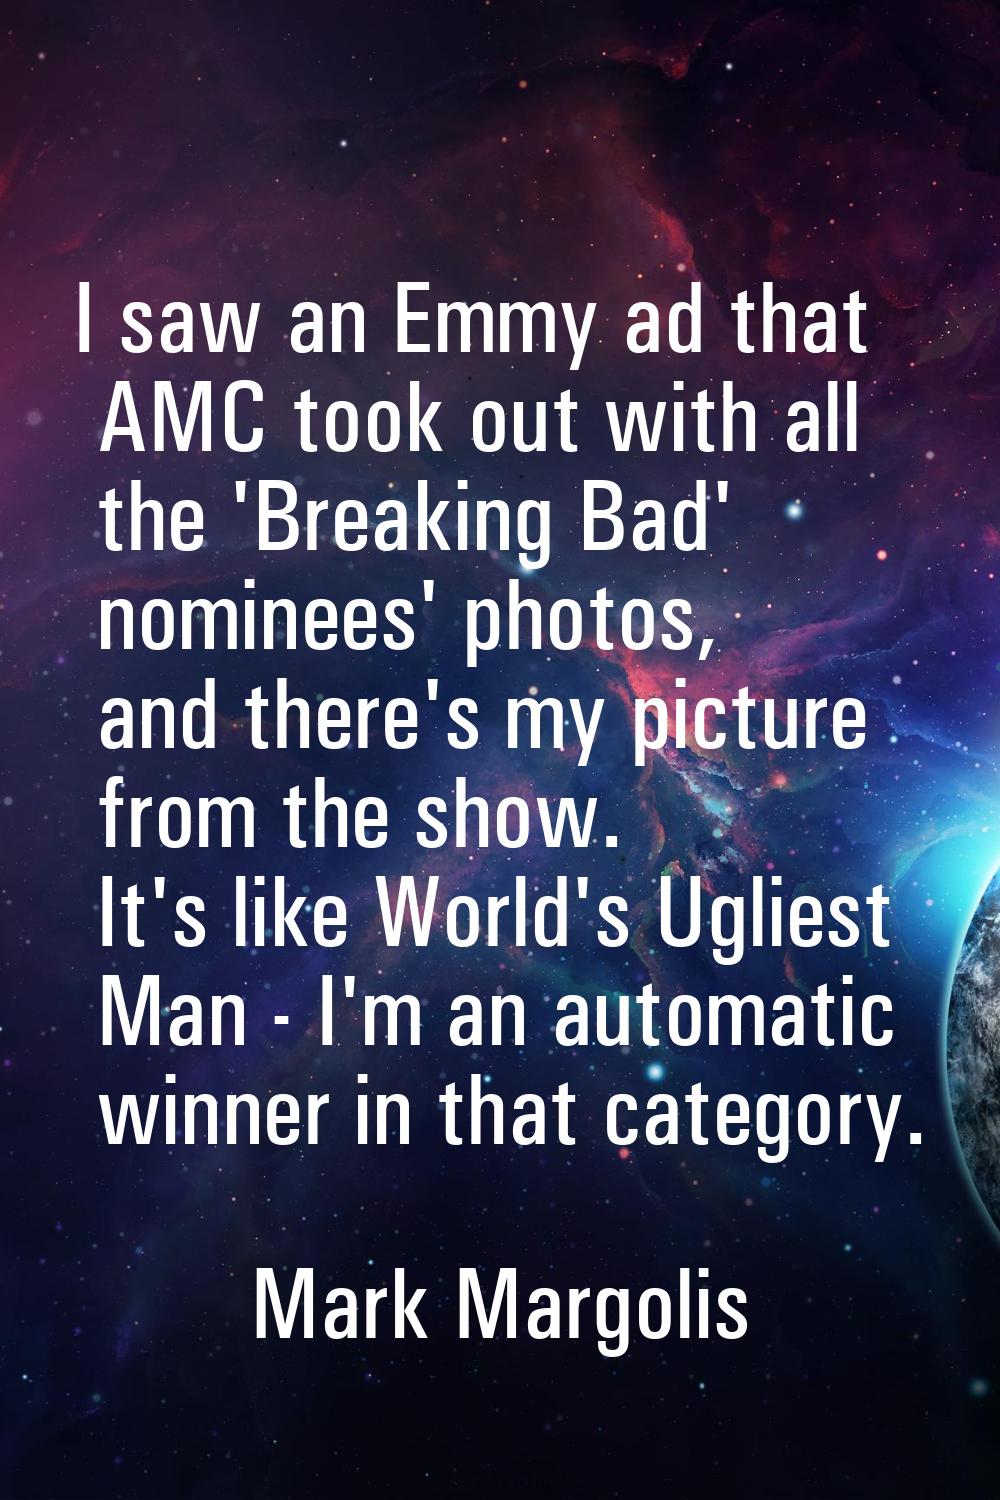 I saw an Emmy ad that AMC took out with all the 'Breaking Bad' nominees' photos, and there's my pic